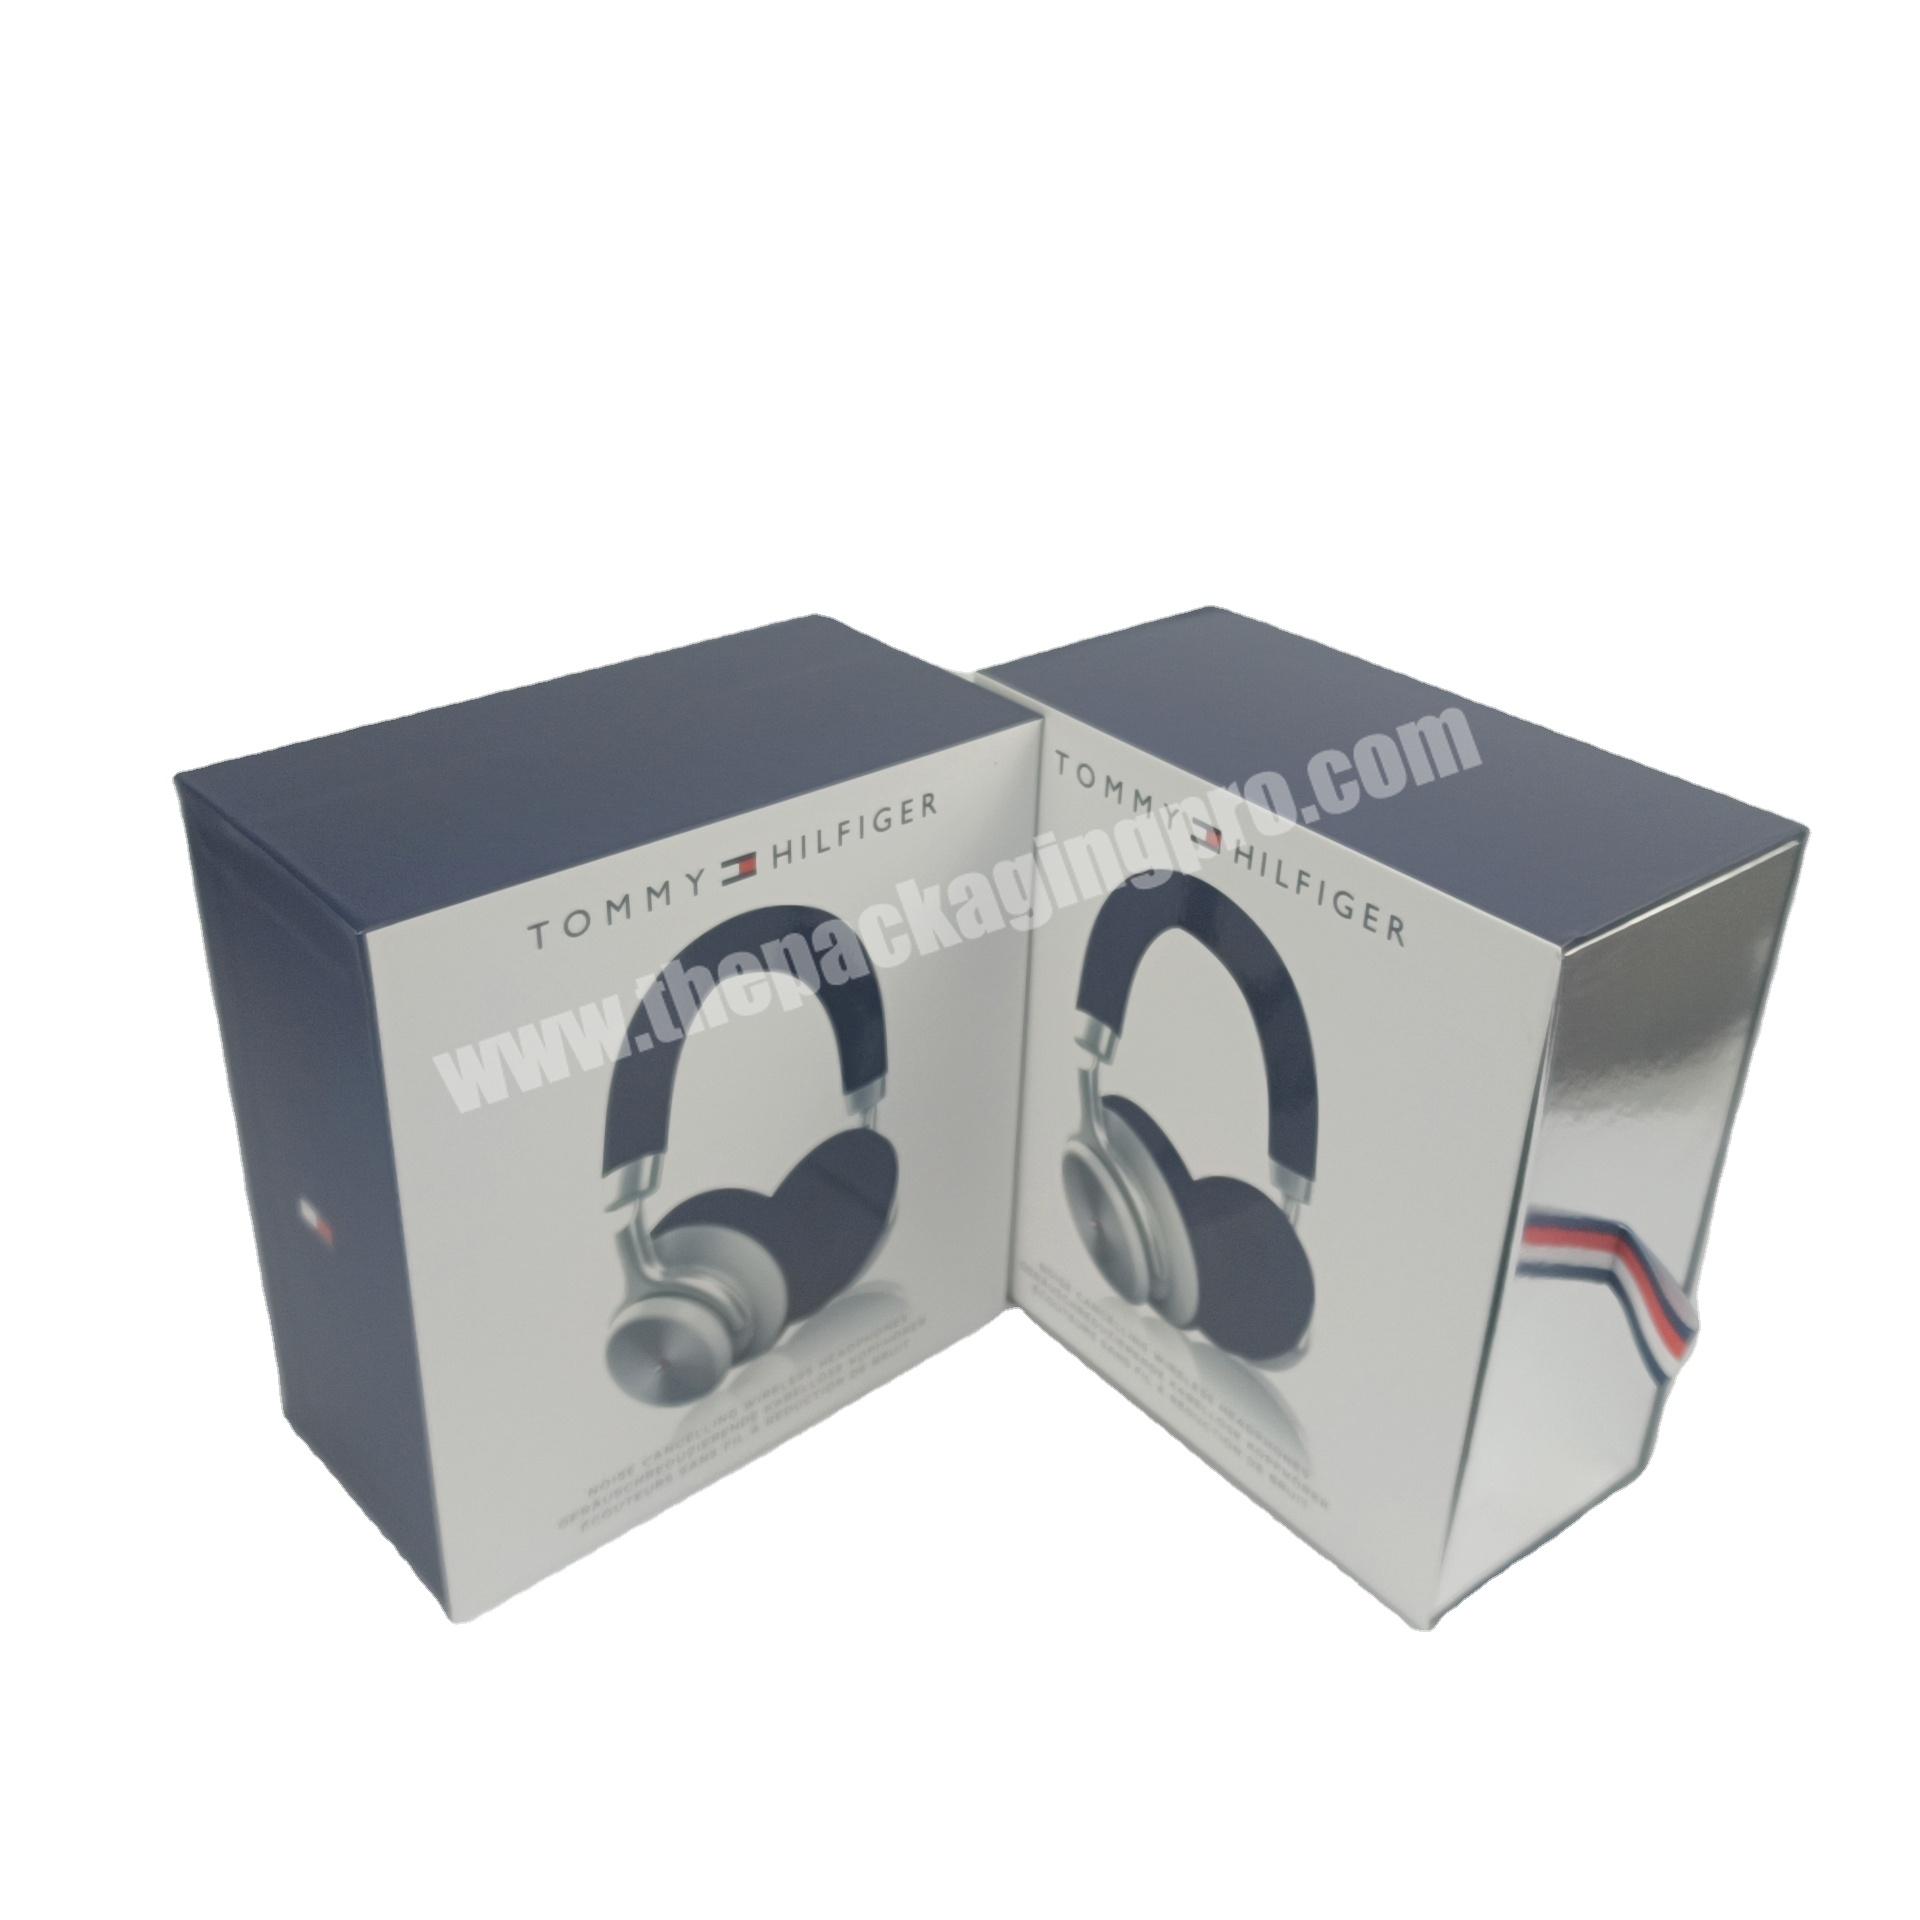 Sencai paper cardboard drawer boxes earphones headphones headset with your own logo